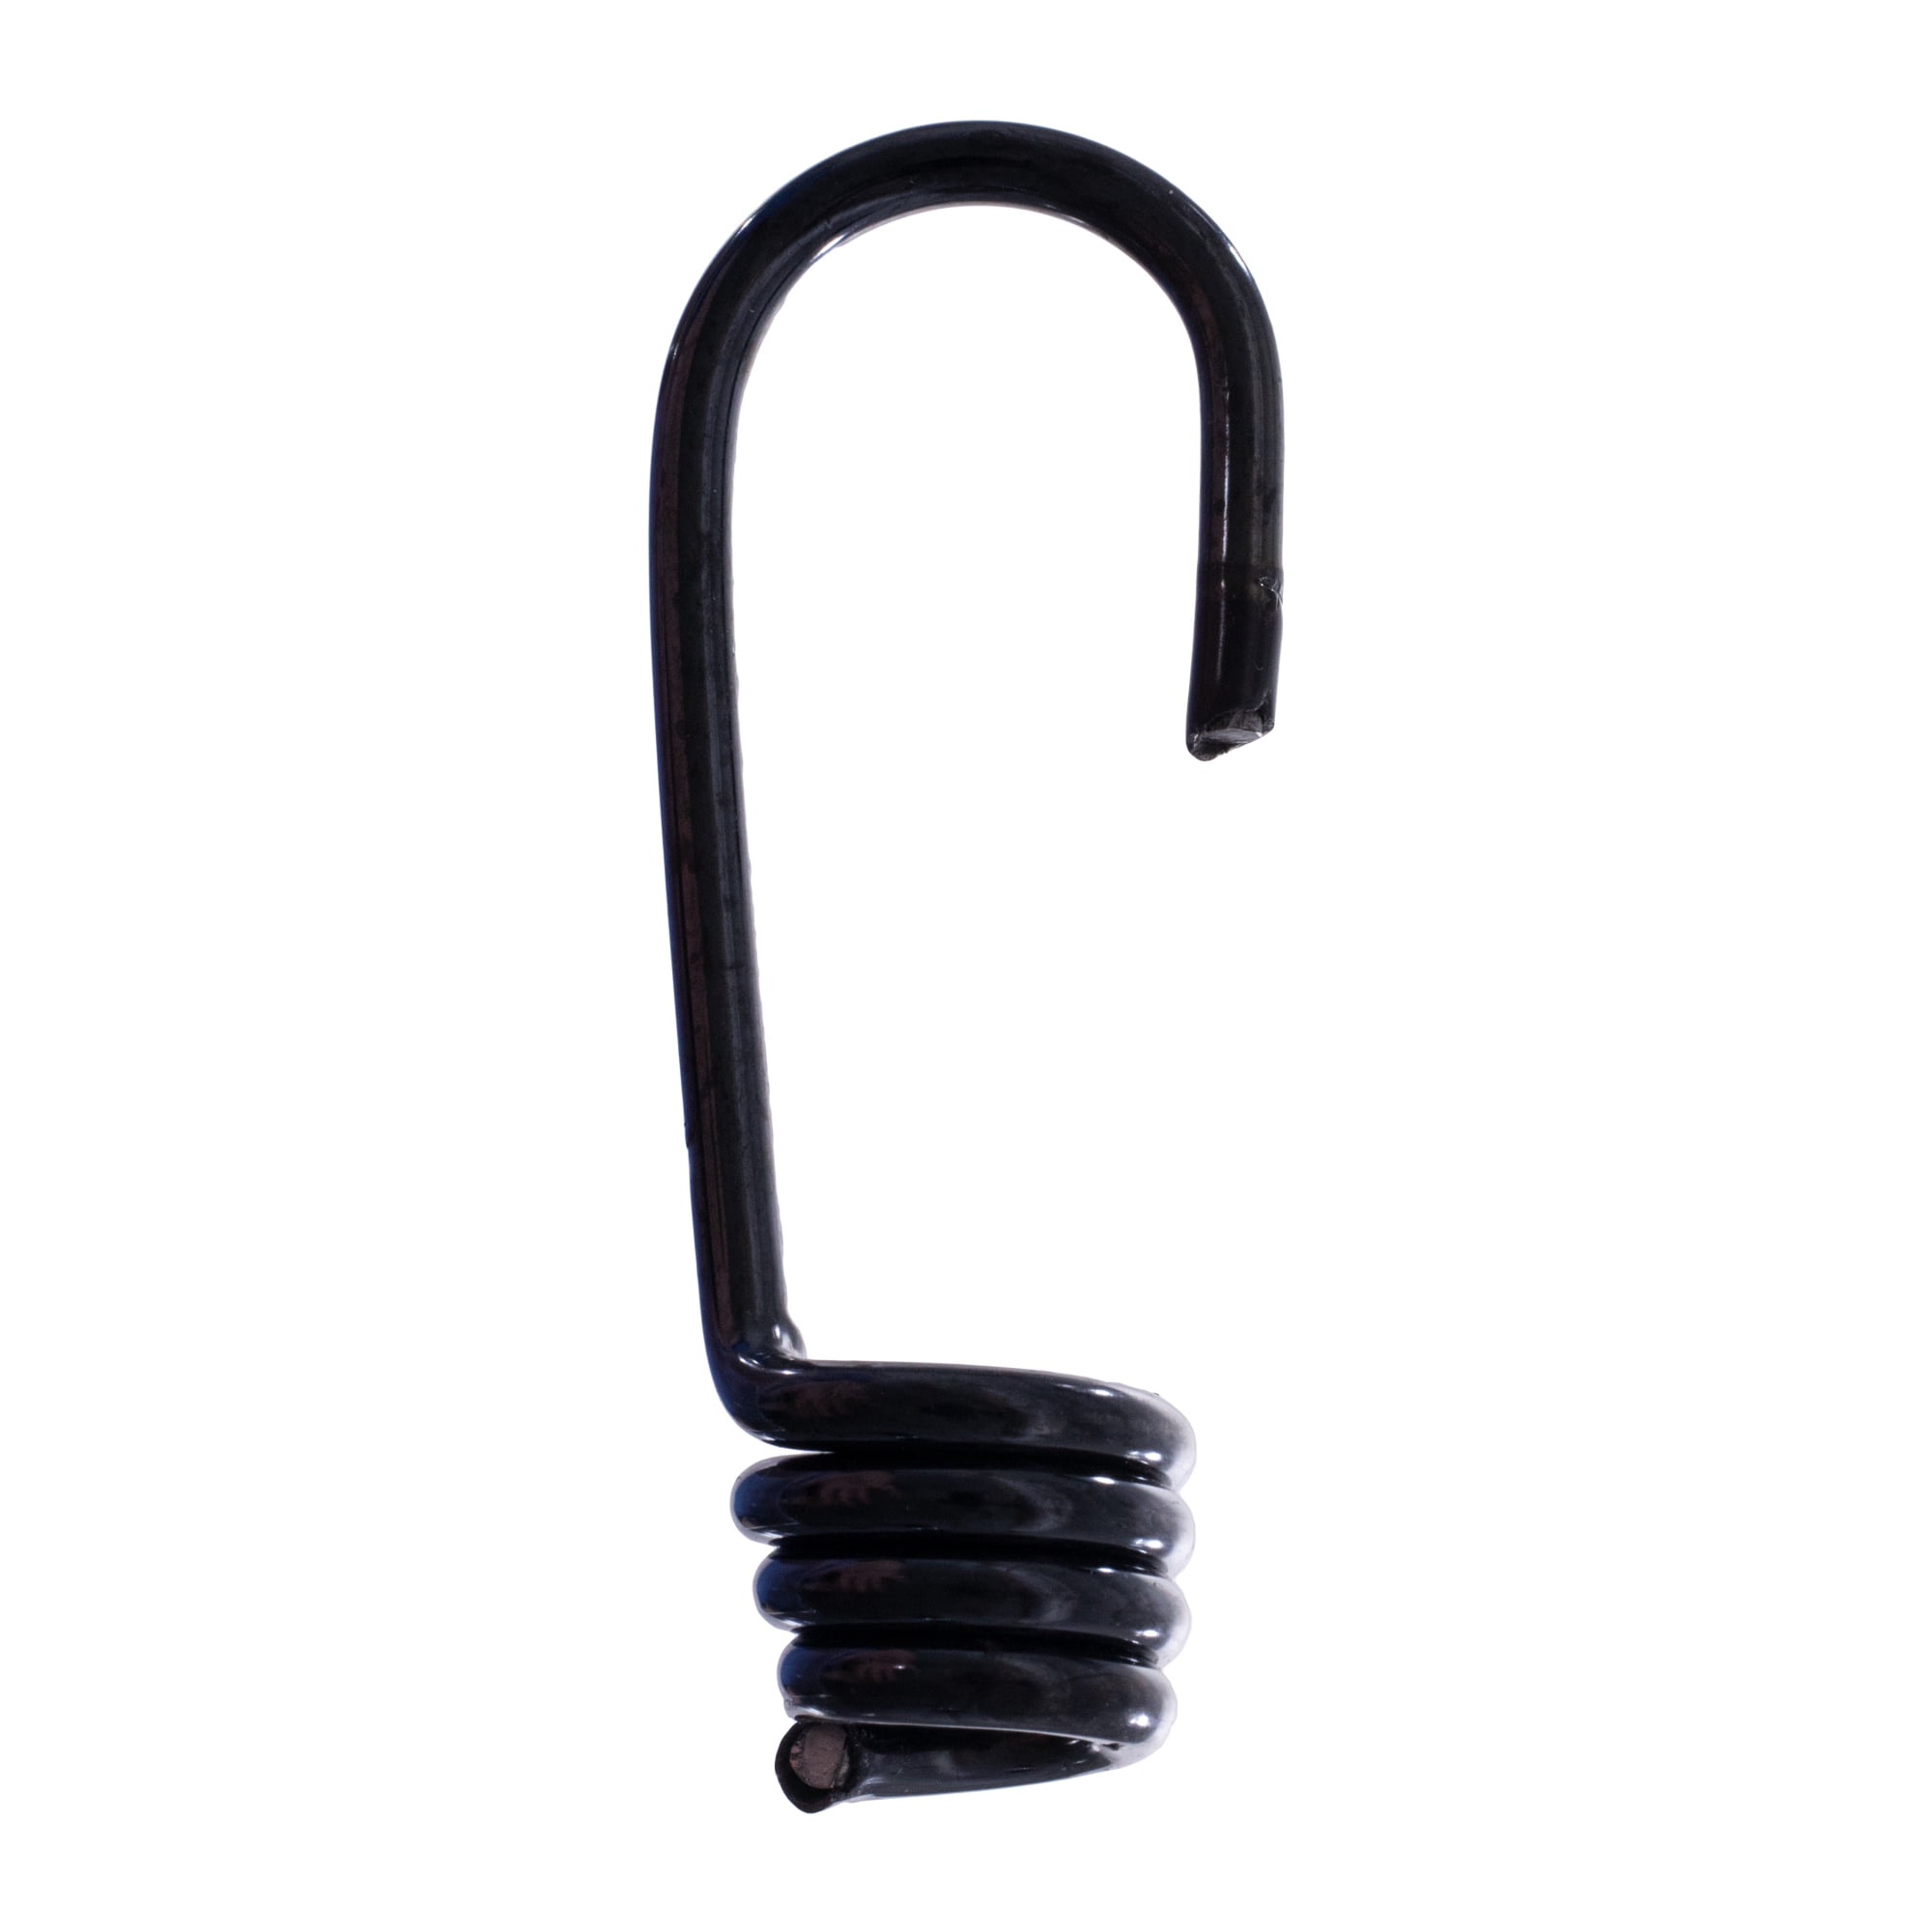 Choose packs of 5 or 20 Paracord Planet Black Shock Bungee Cord End Hooks 10 